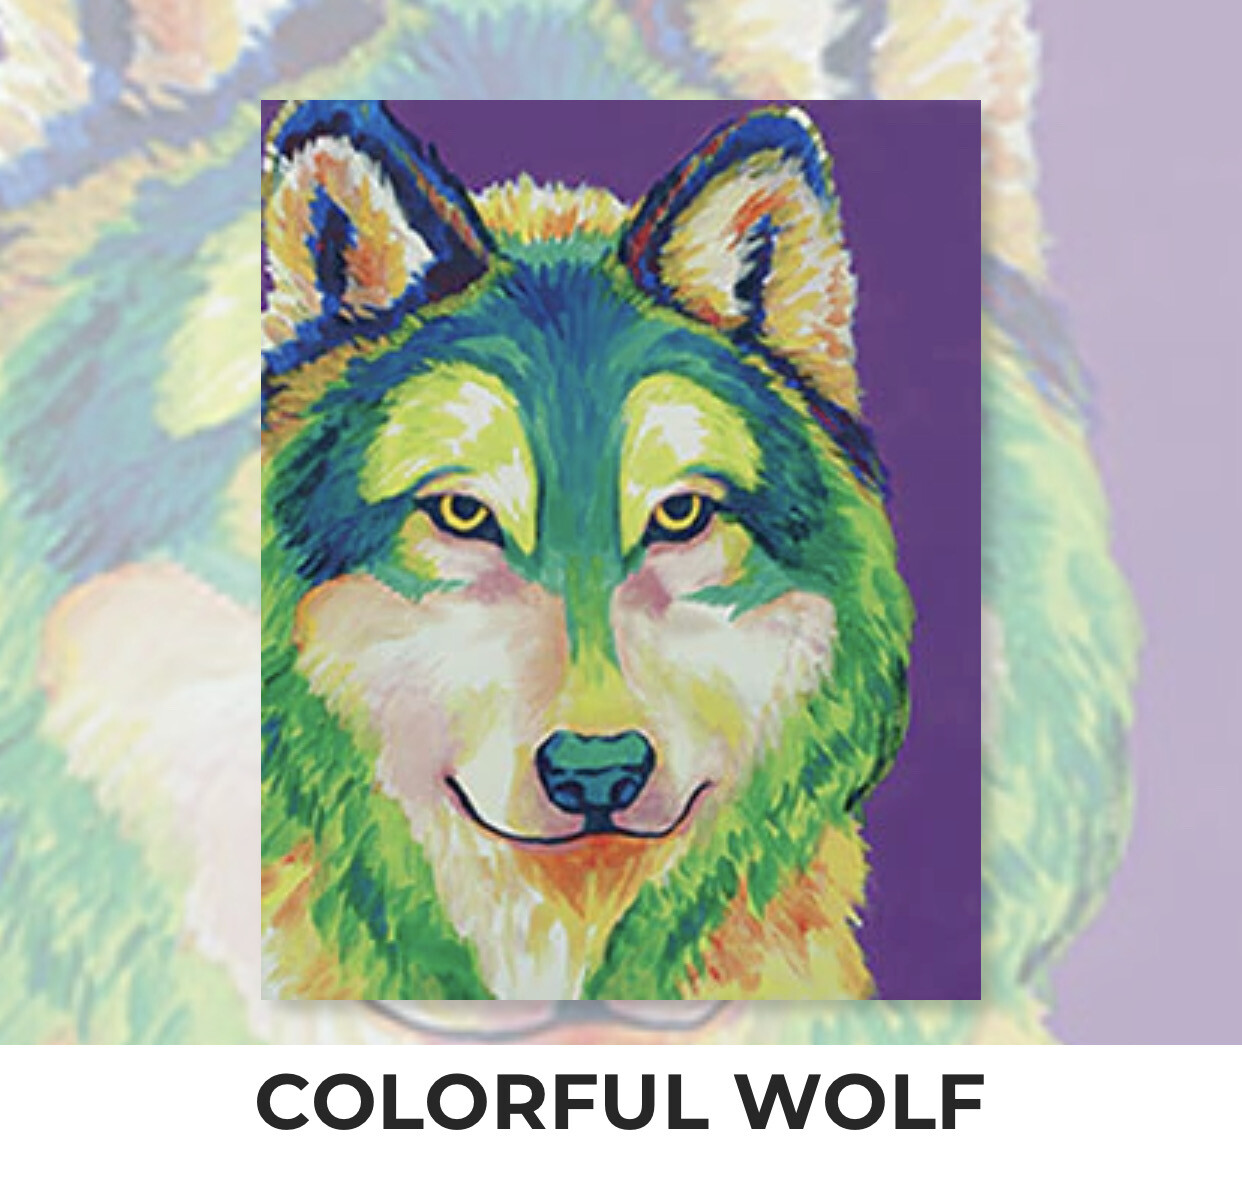 Colorful Wolf ADULT Acrylic Paint On Canvas DIY Art Kit - 3 Week Special Order